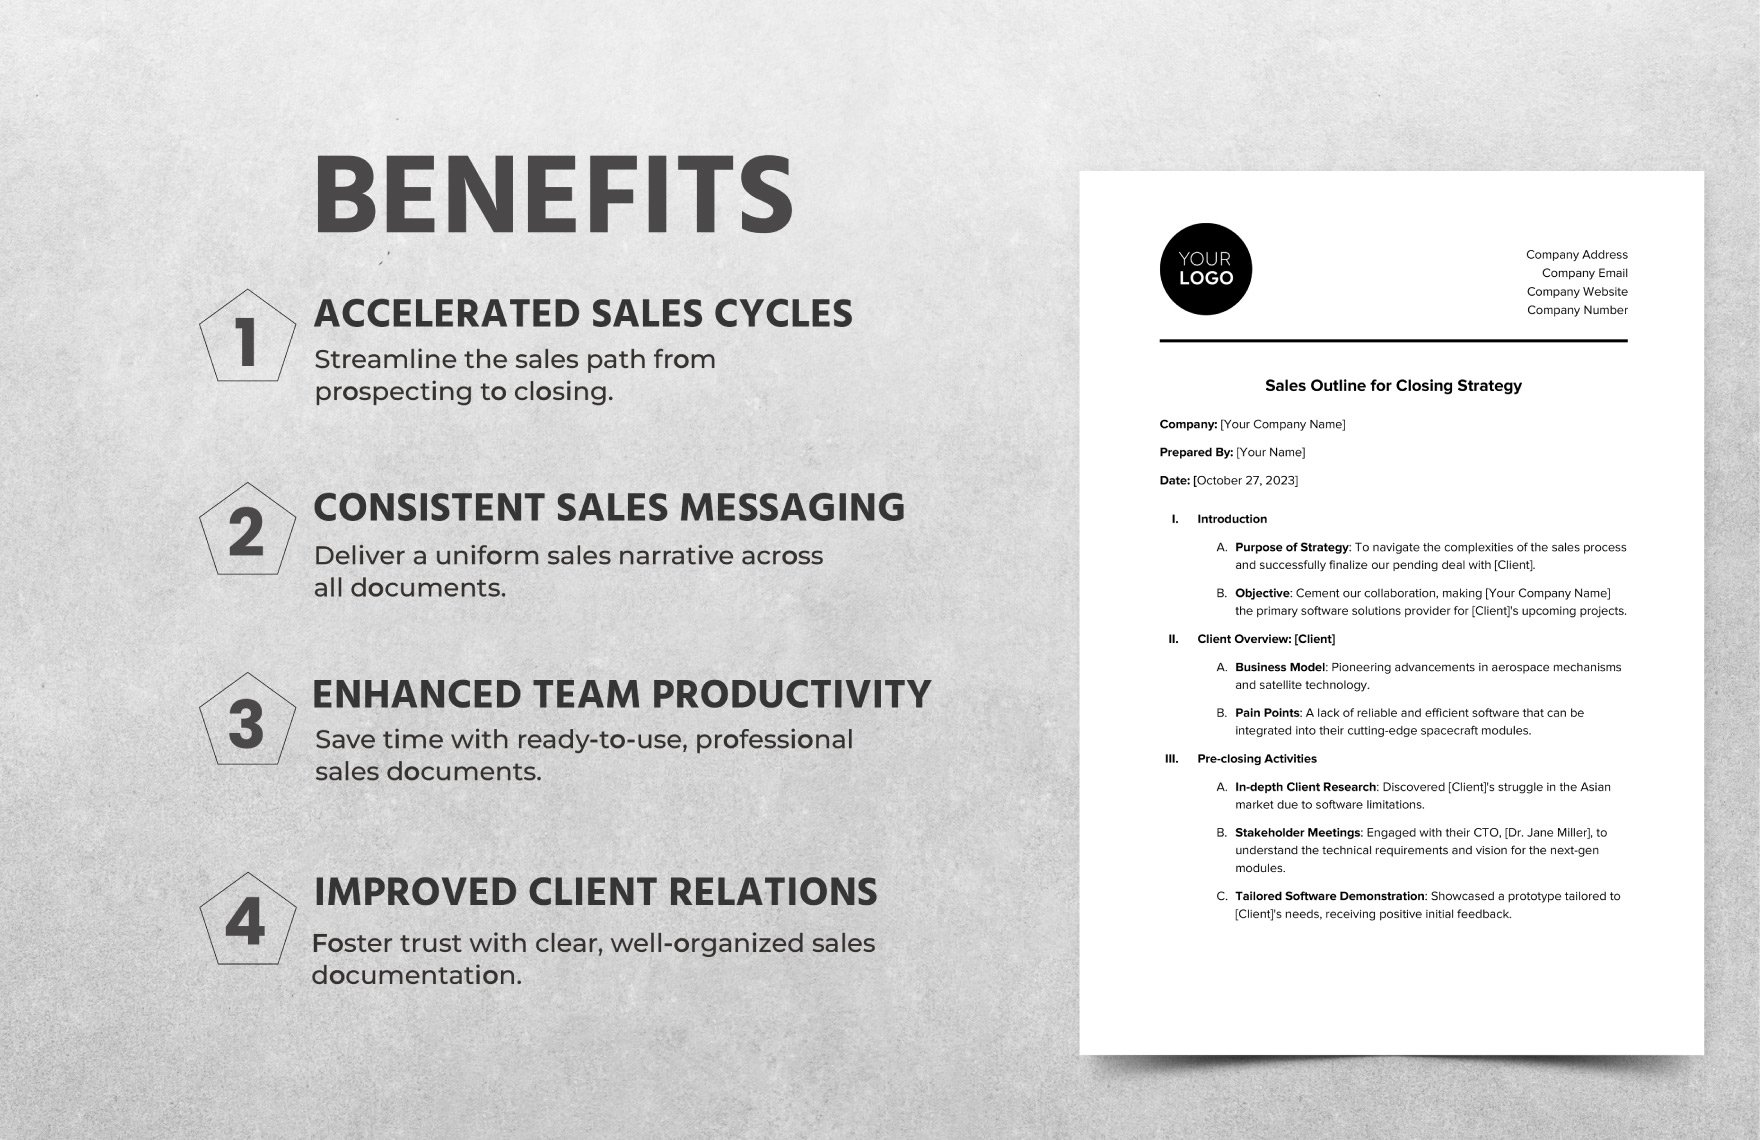 Sales Outline for Closing Strategy Template